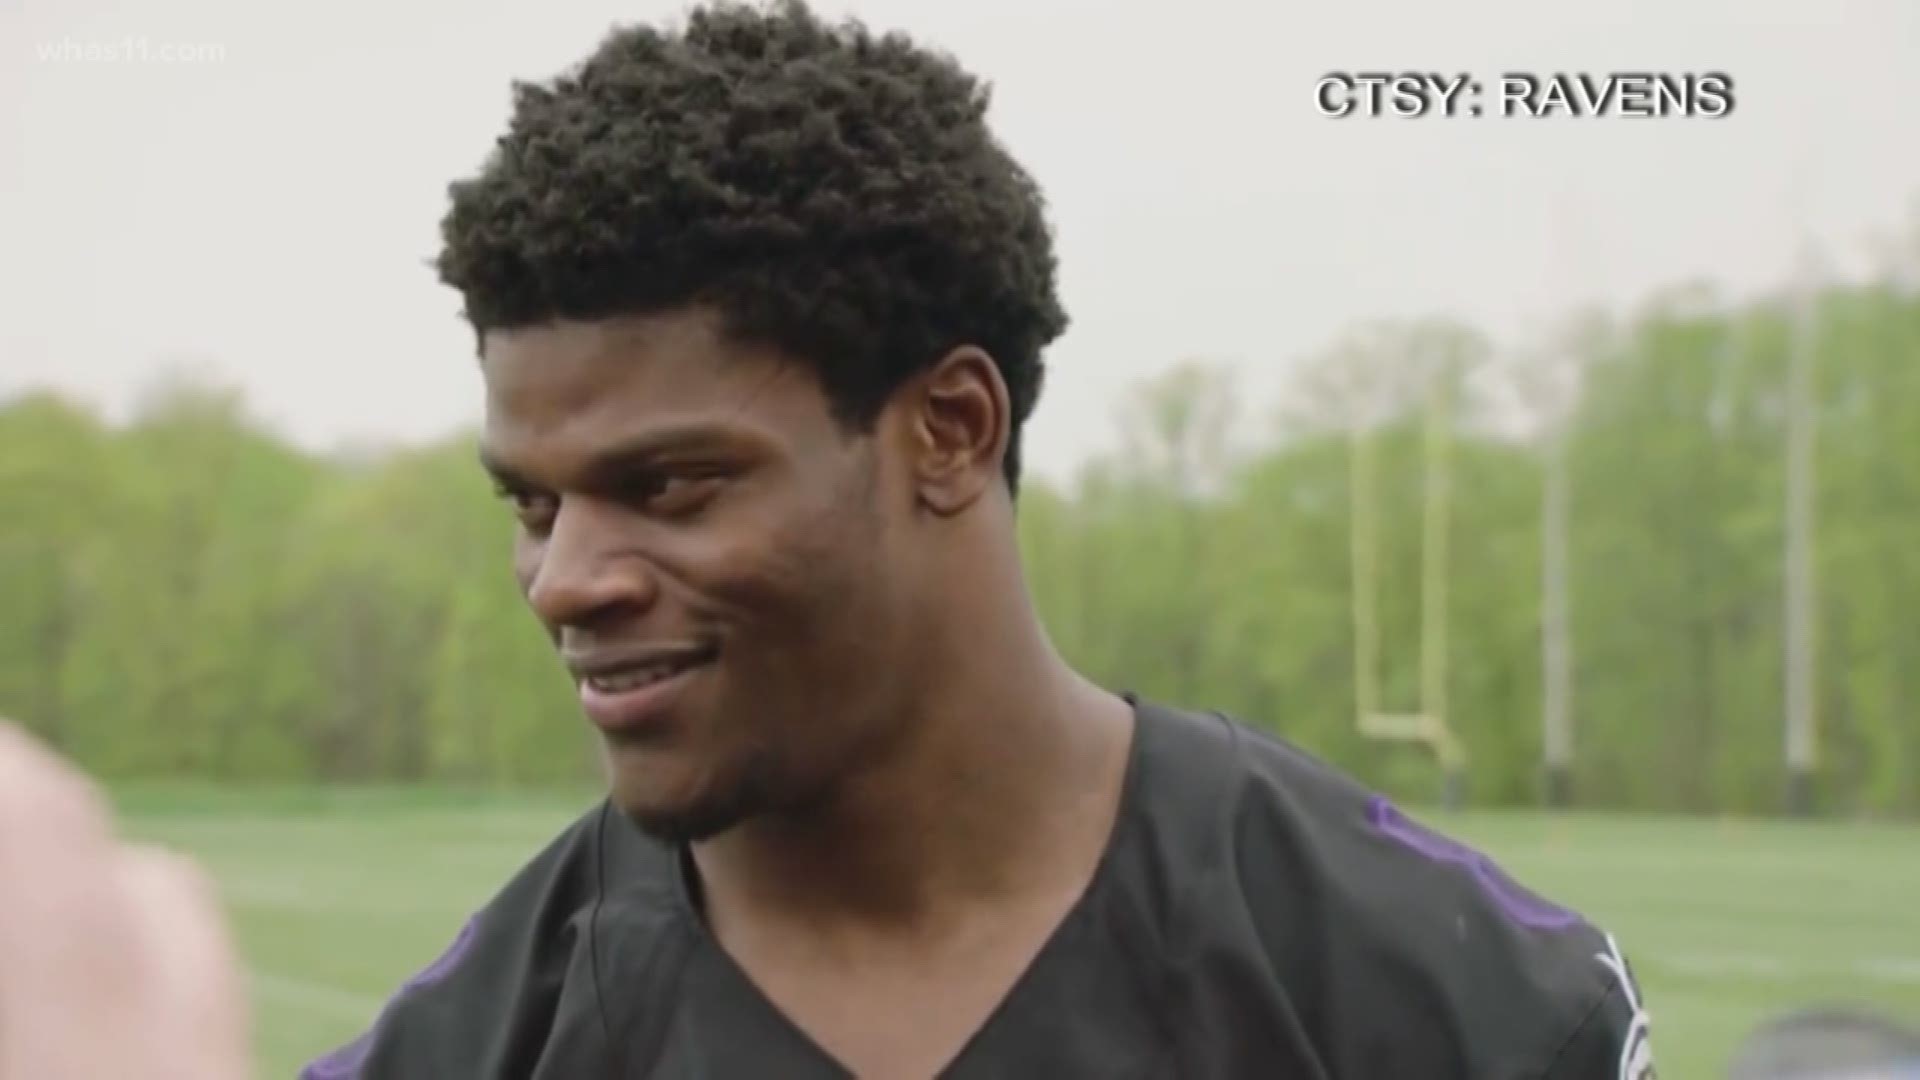 The former Louisville Cardinal just wrapped up 2 days of rookie minicamp with the Baltimore Ravens where he went through drills and routes with his new teammates.